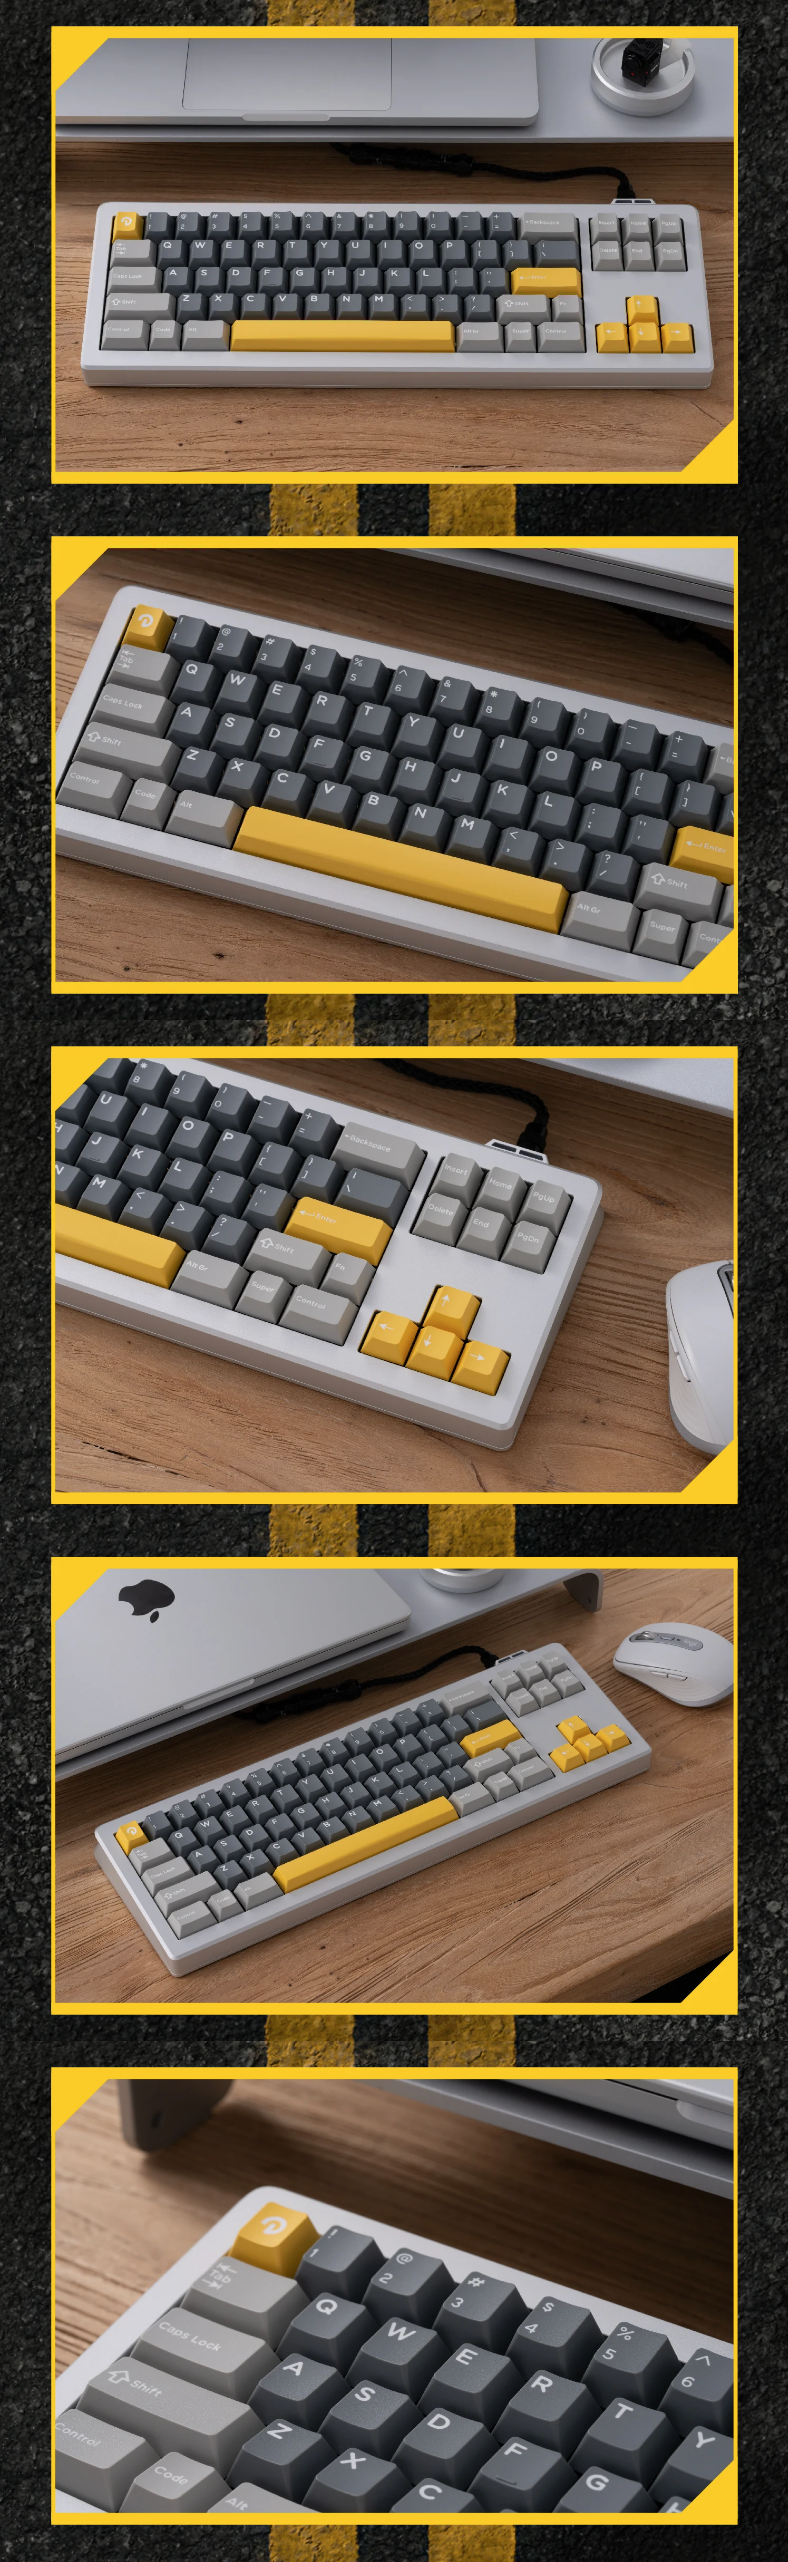 DOMIKEY CHASER Cherry Profile Keycaps